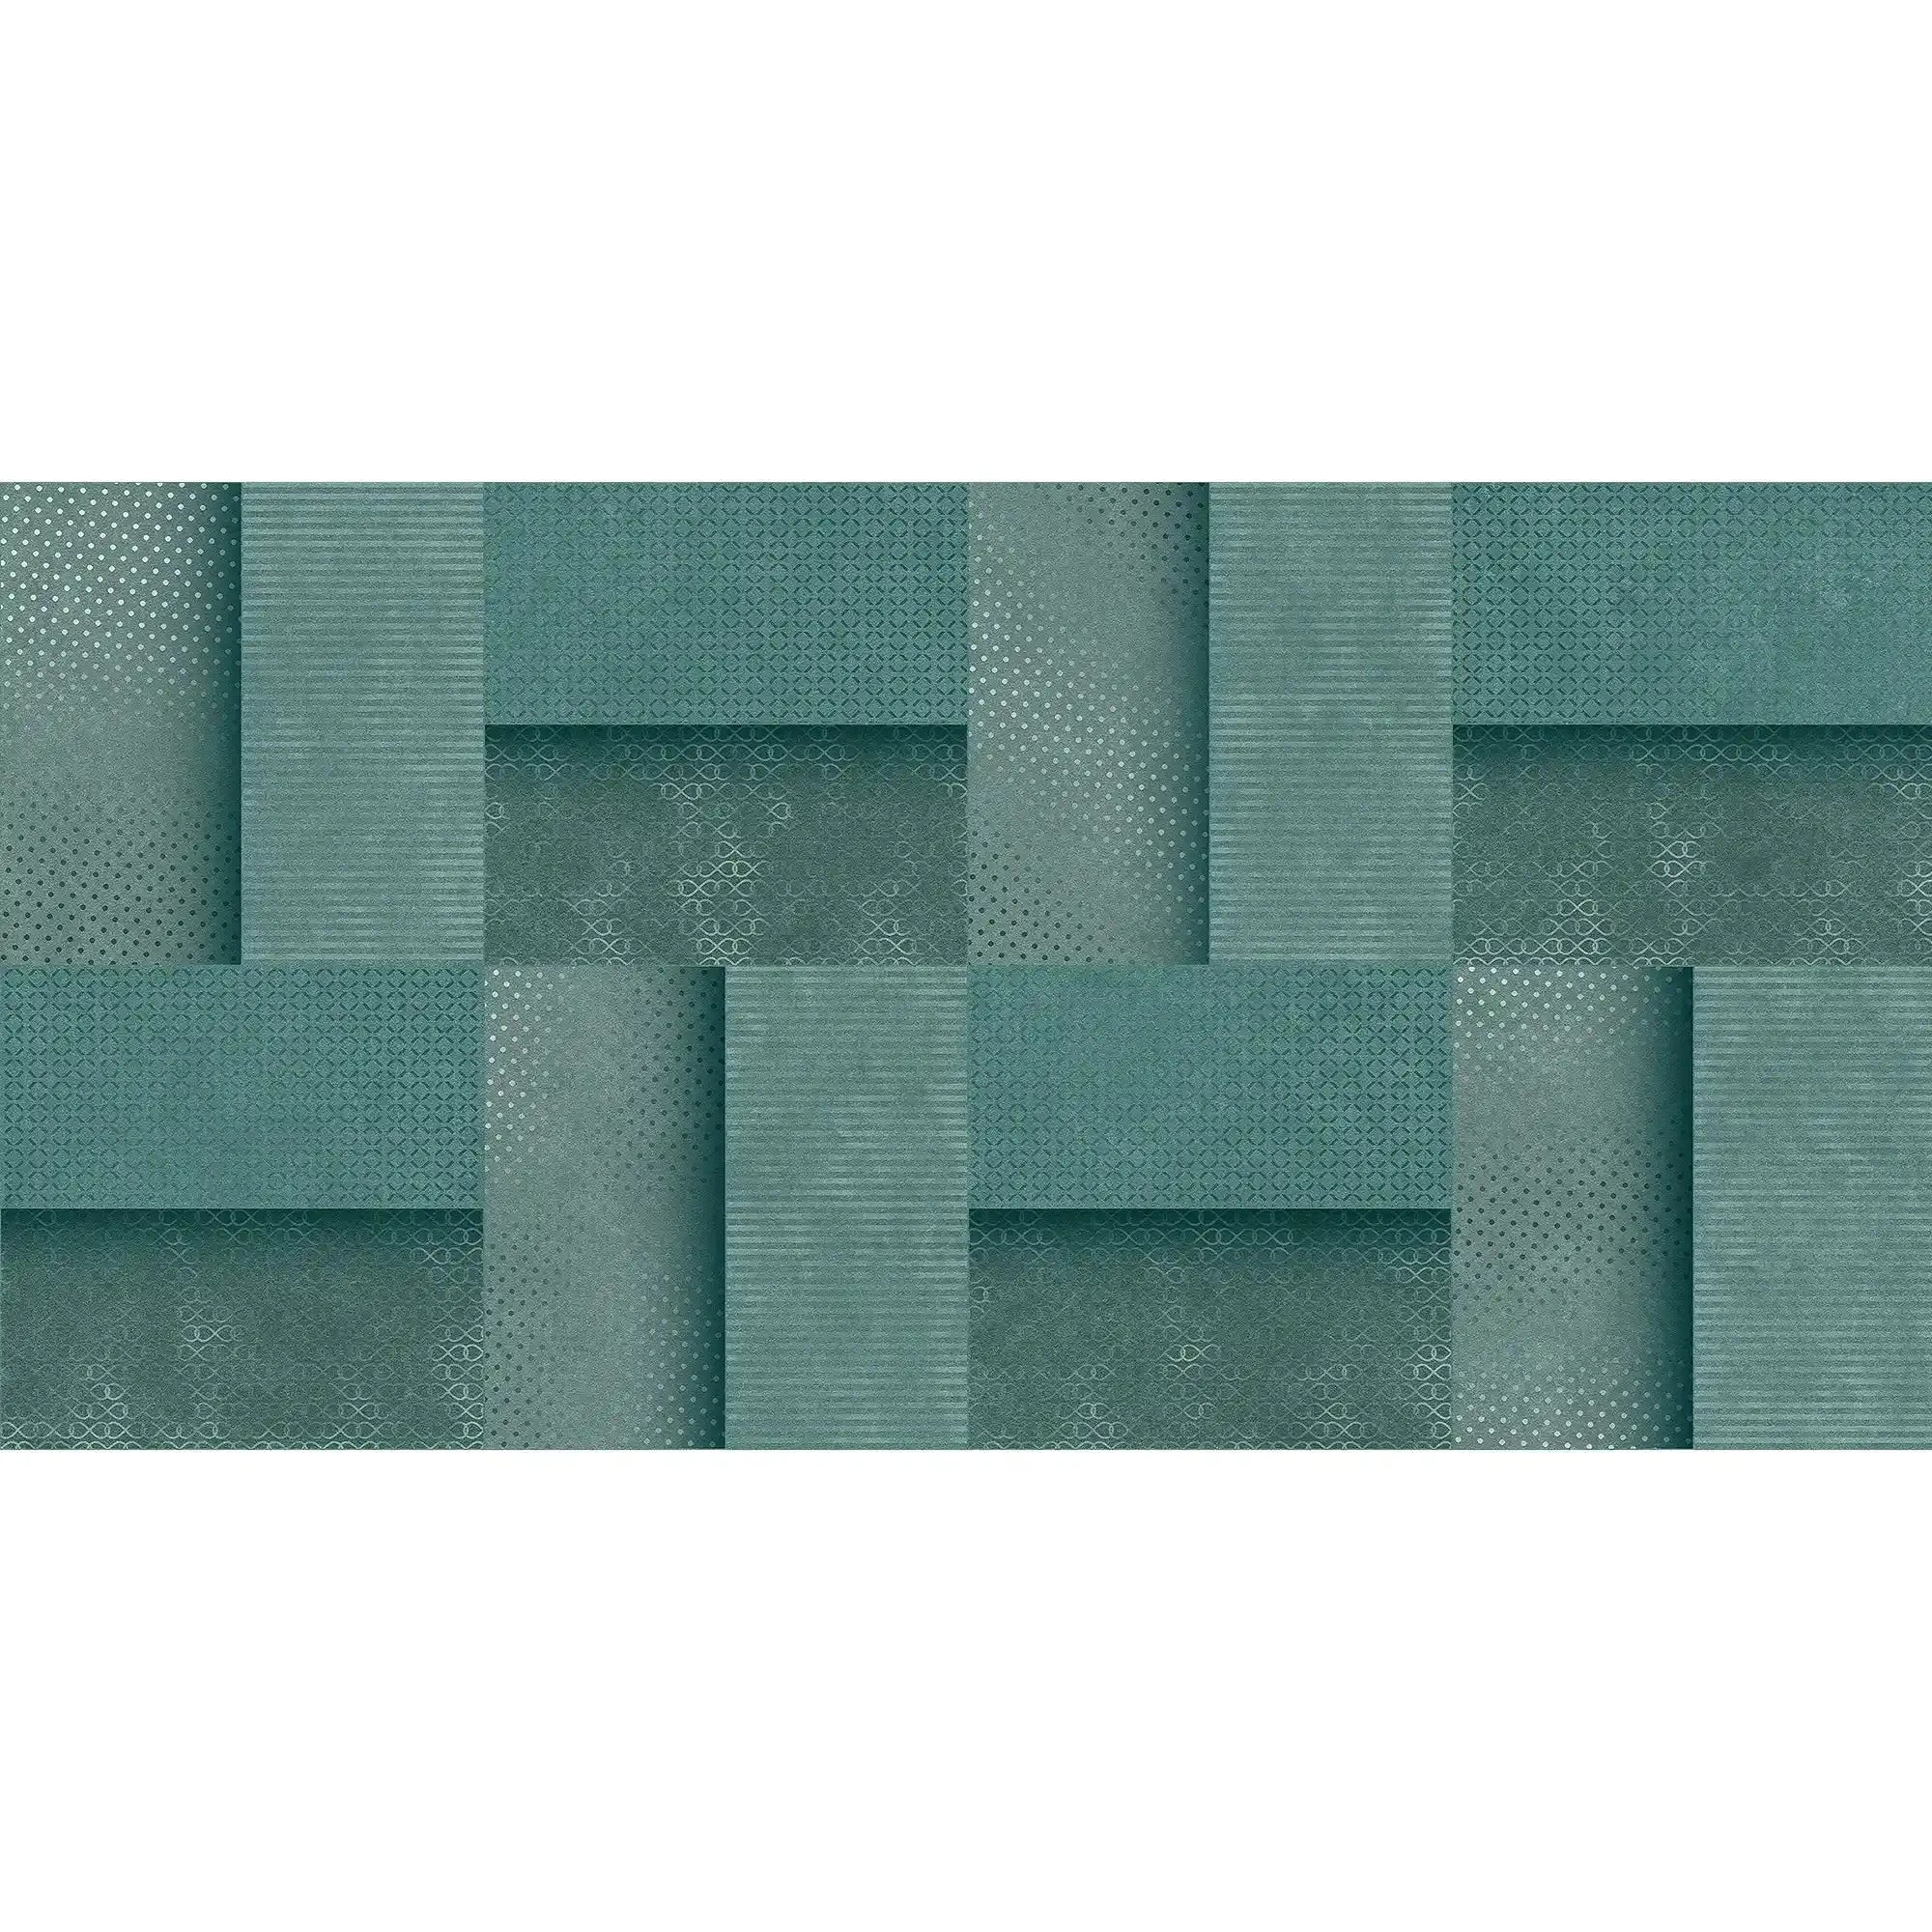 3082-B / Peel and Stick Wallpaper: Blue Tile Square Pattern, Easy Install, Adhesive Wall Decor for Bathroom, Kitchen, and Living Room - Artevella